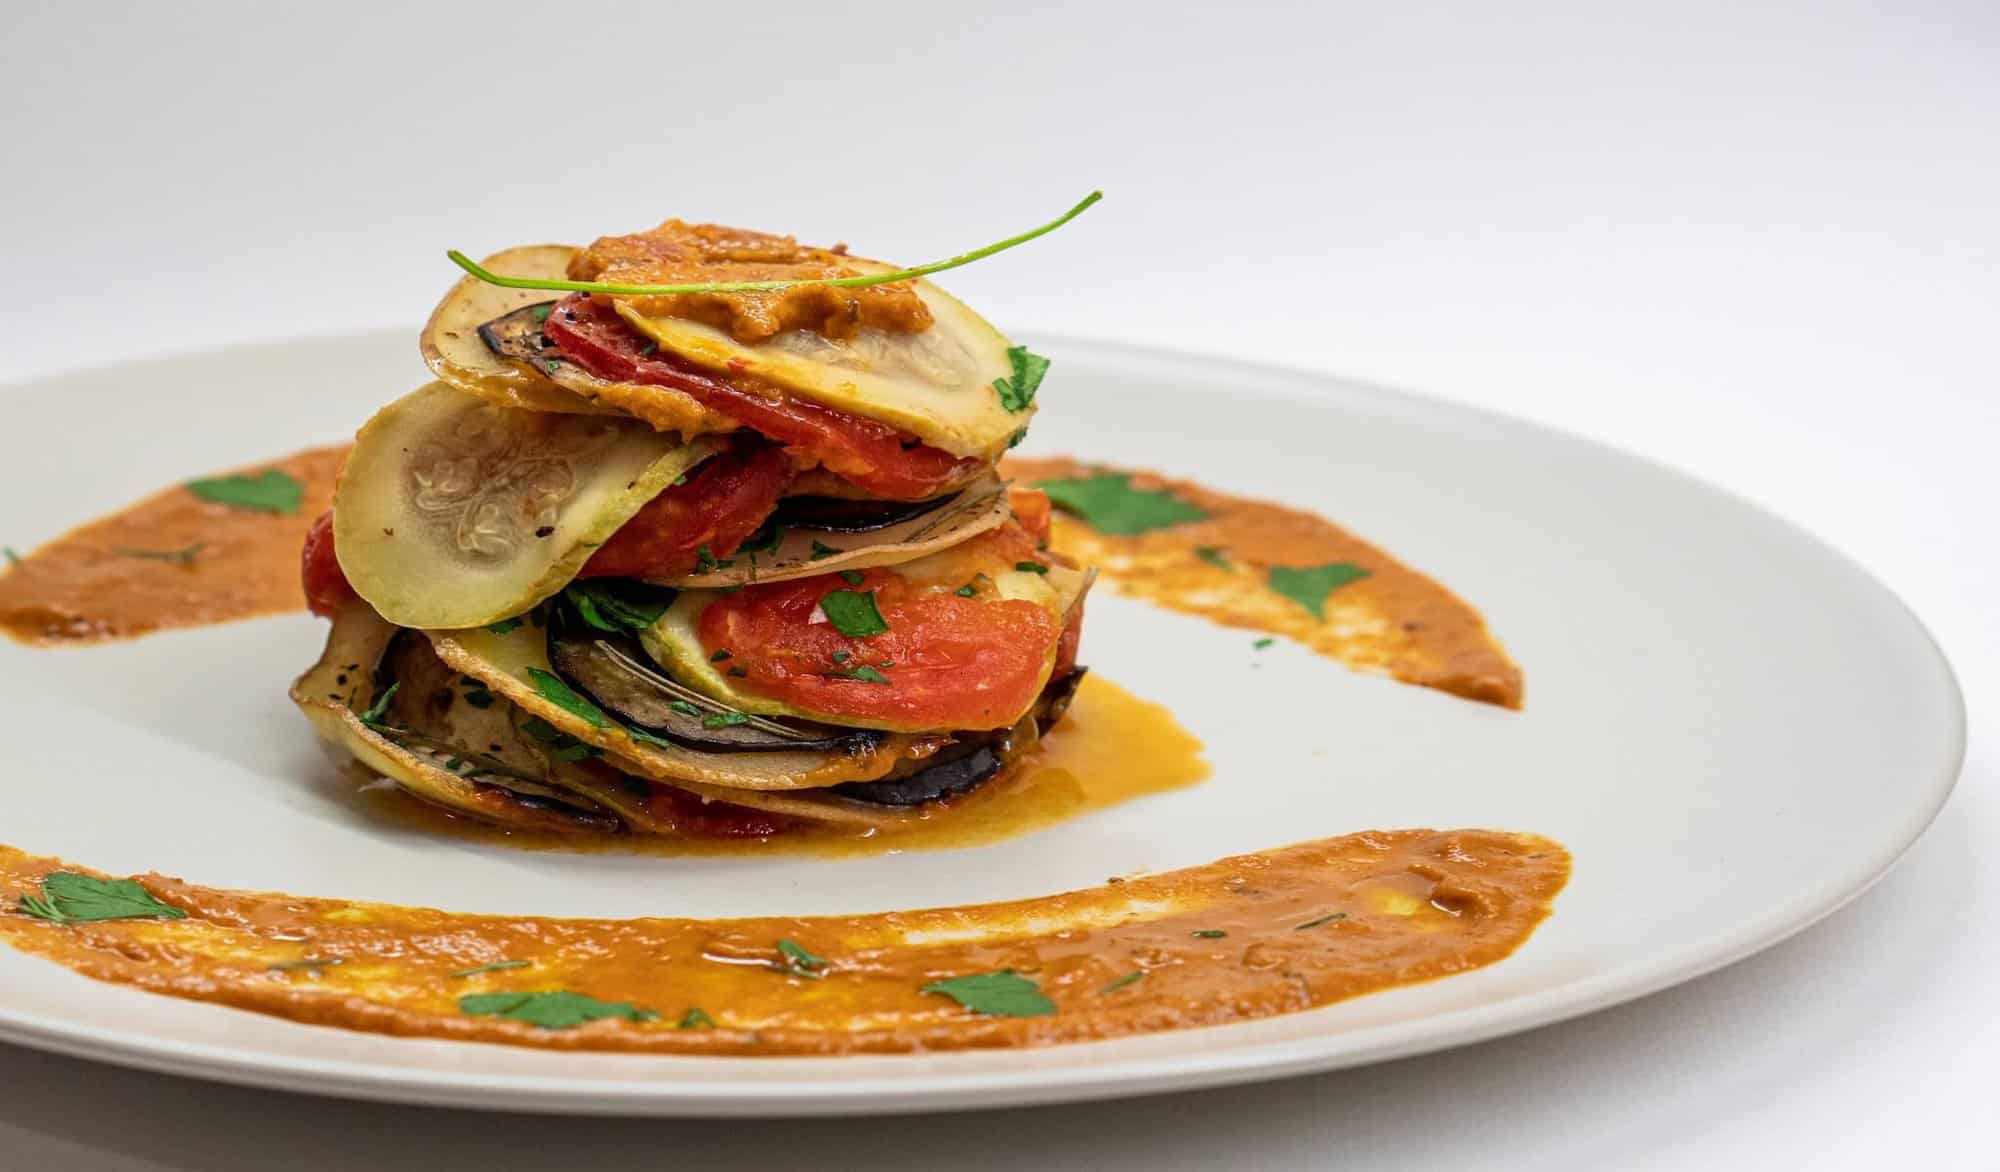 A classic French dish of Ratatouile with colorful sliced vegetables and a garnish of tomato sauce.